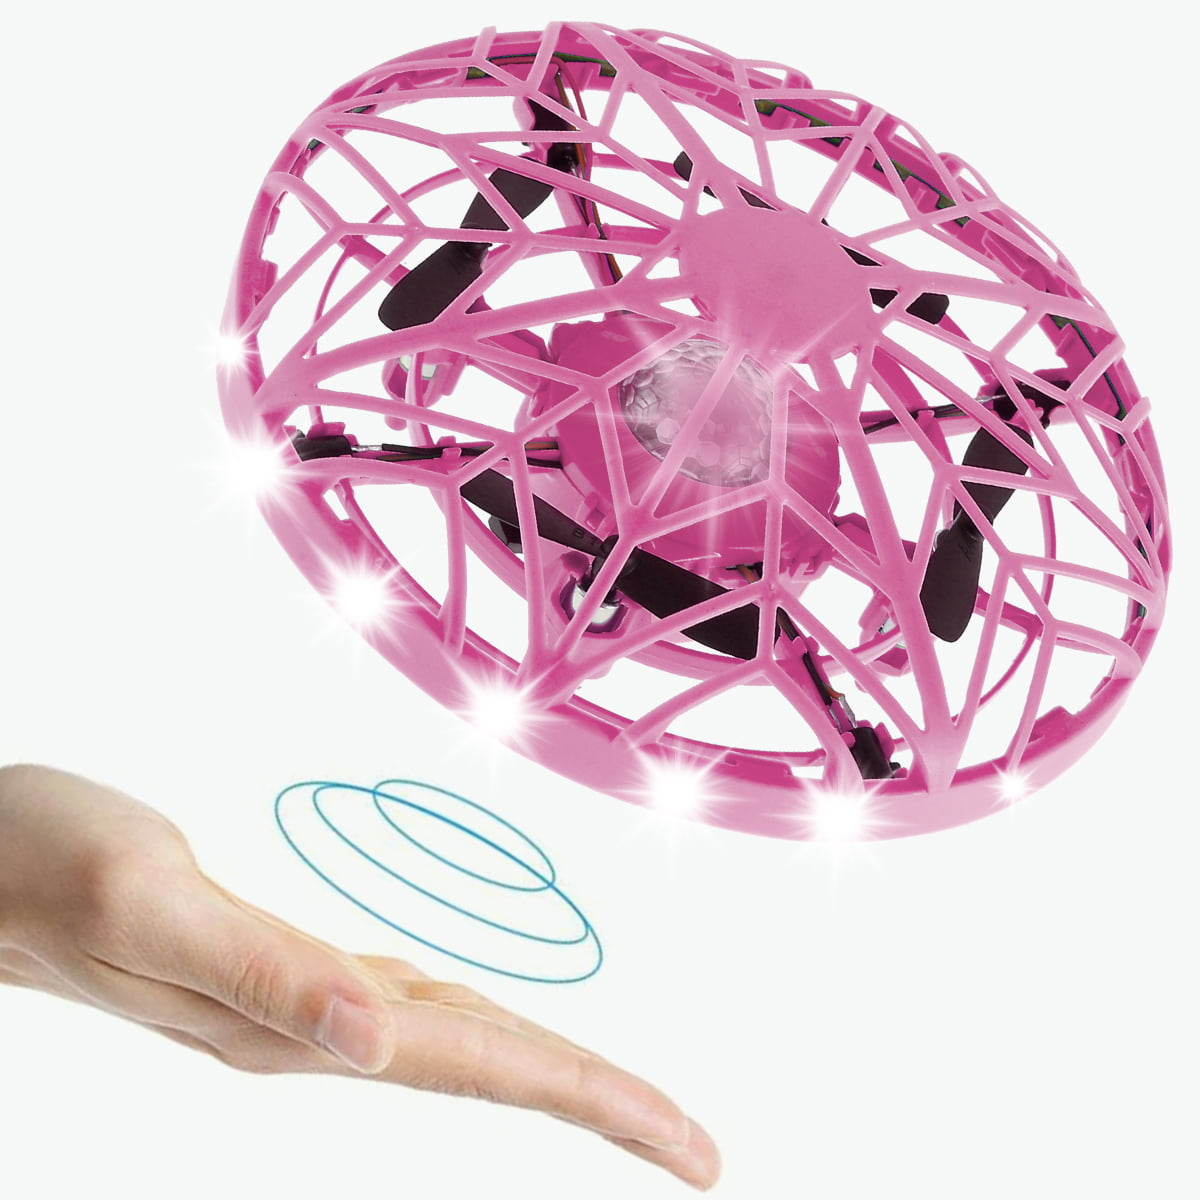 Mini ABS Drone Remote Control Helicopter UFO Hand Controlled Flying Ball Toy Kit 